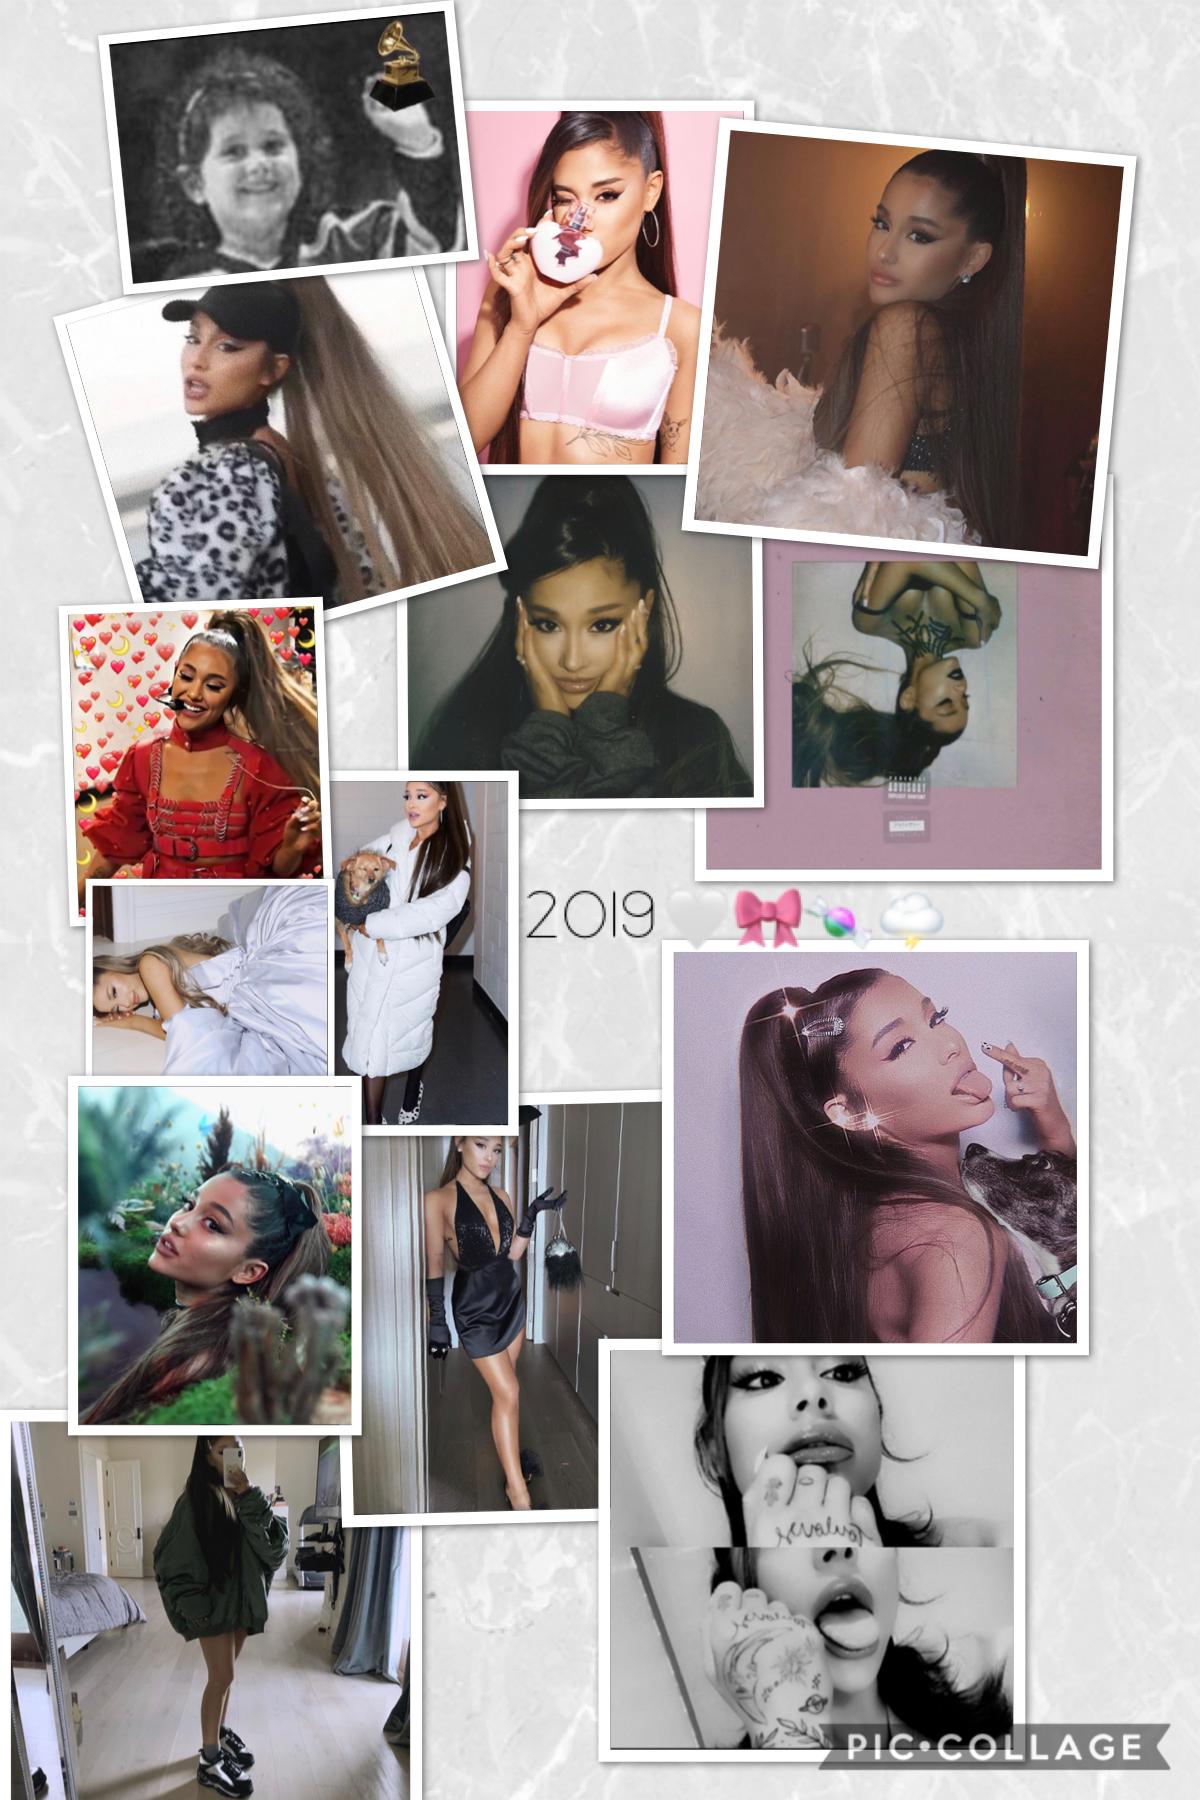 my fav 2019 Ari moments🖤 reply with some of your fav pics!